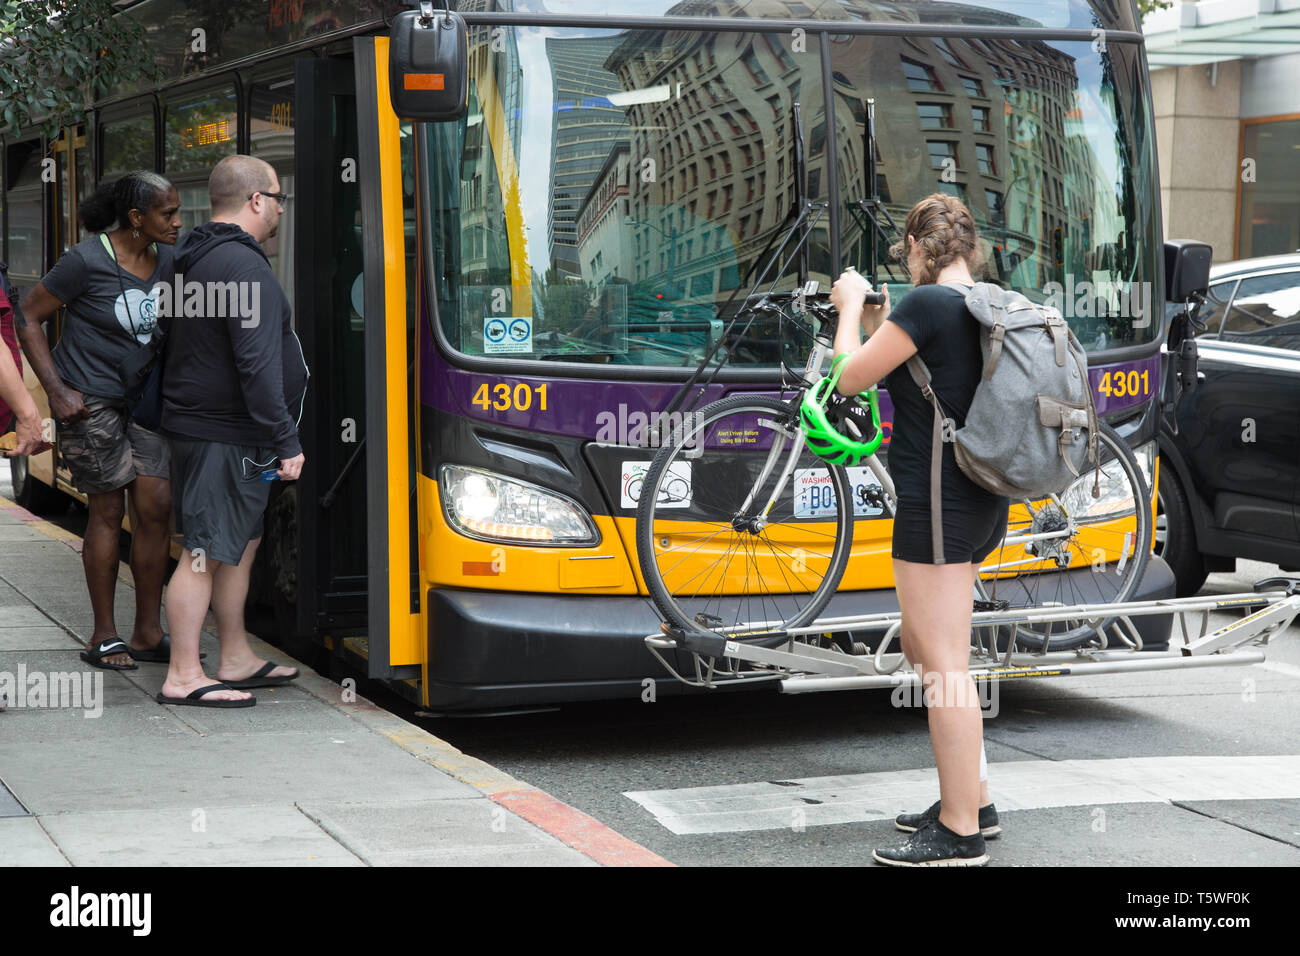 People catching a city bus waiting in turns and one young woman loading up her bicycle on the front of the bus in downtown, Seattle, USA. Stock Photo